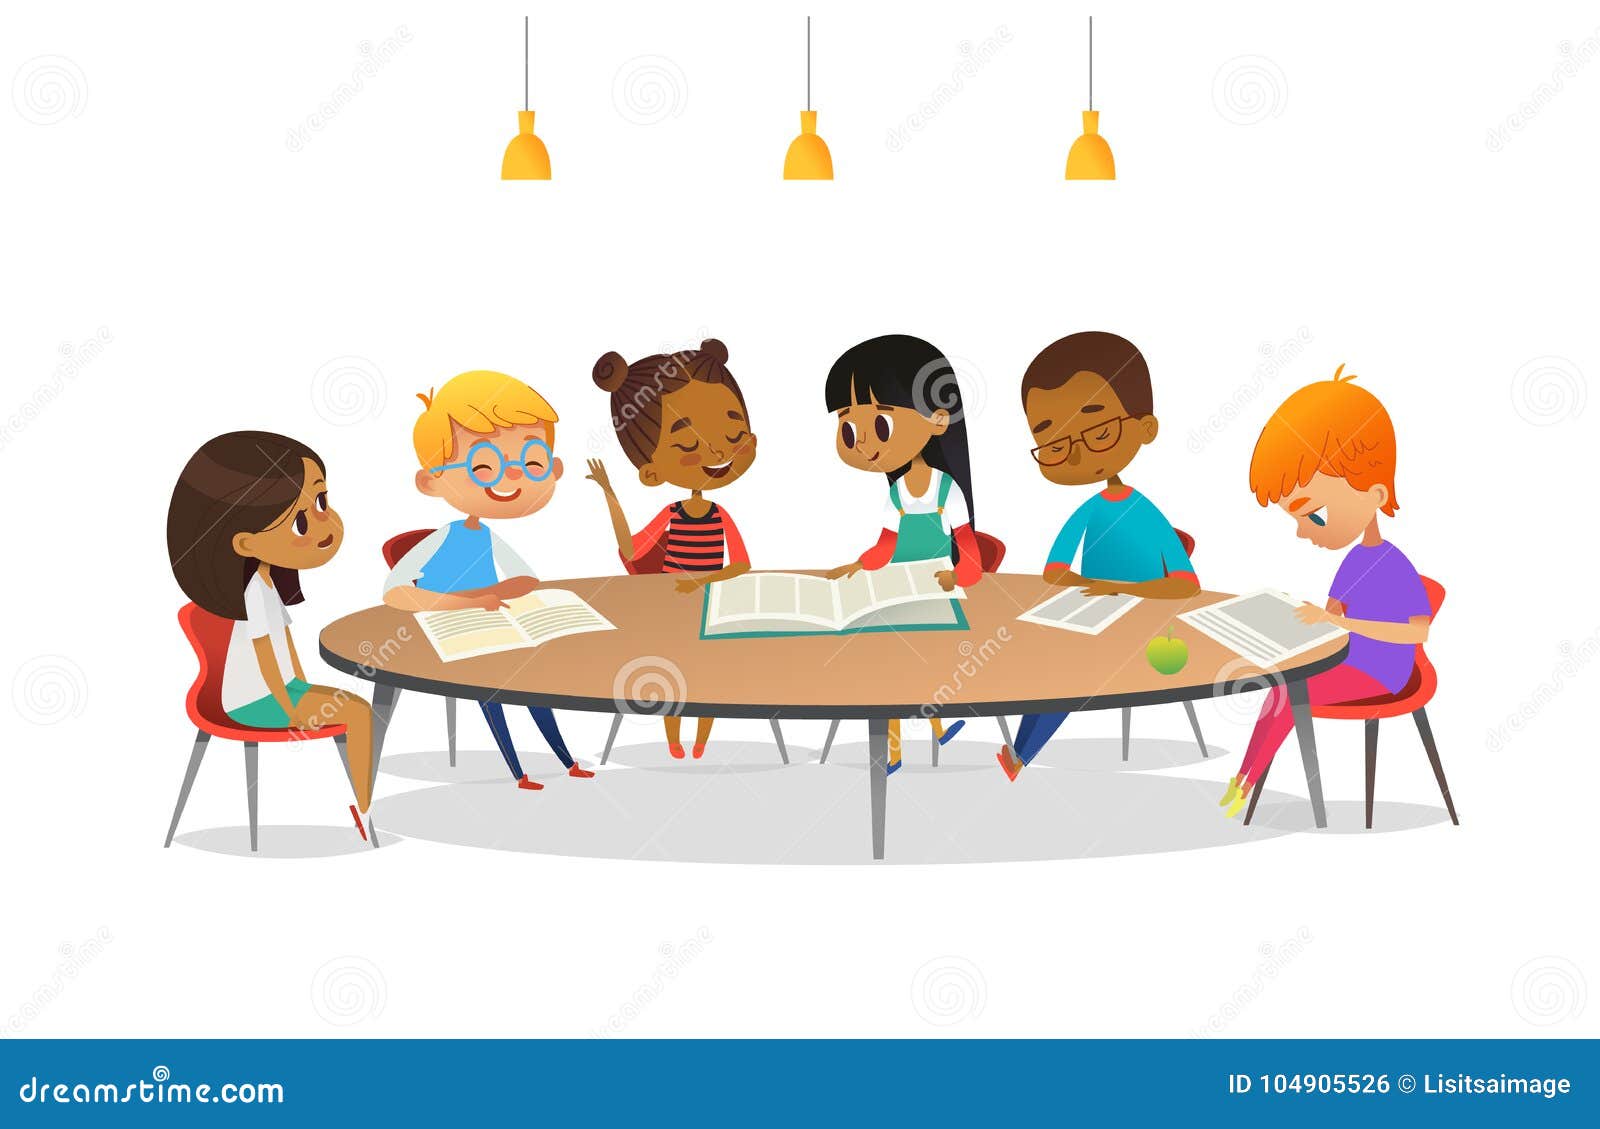 boys and girls sitting around round table, studying, reading books and discuss them. kids talking to each other at